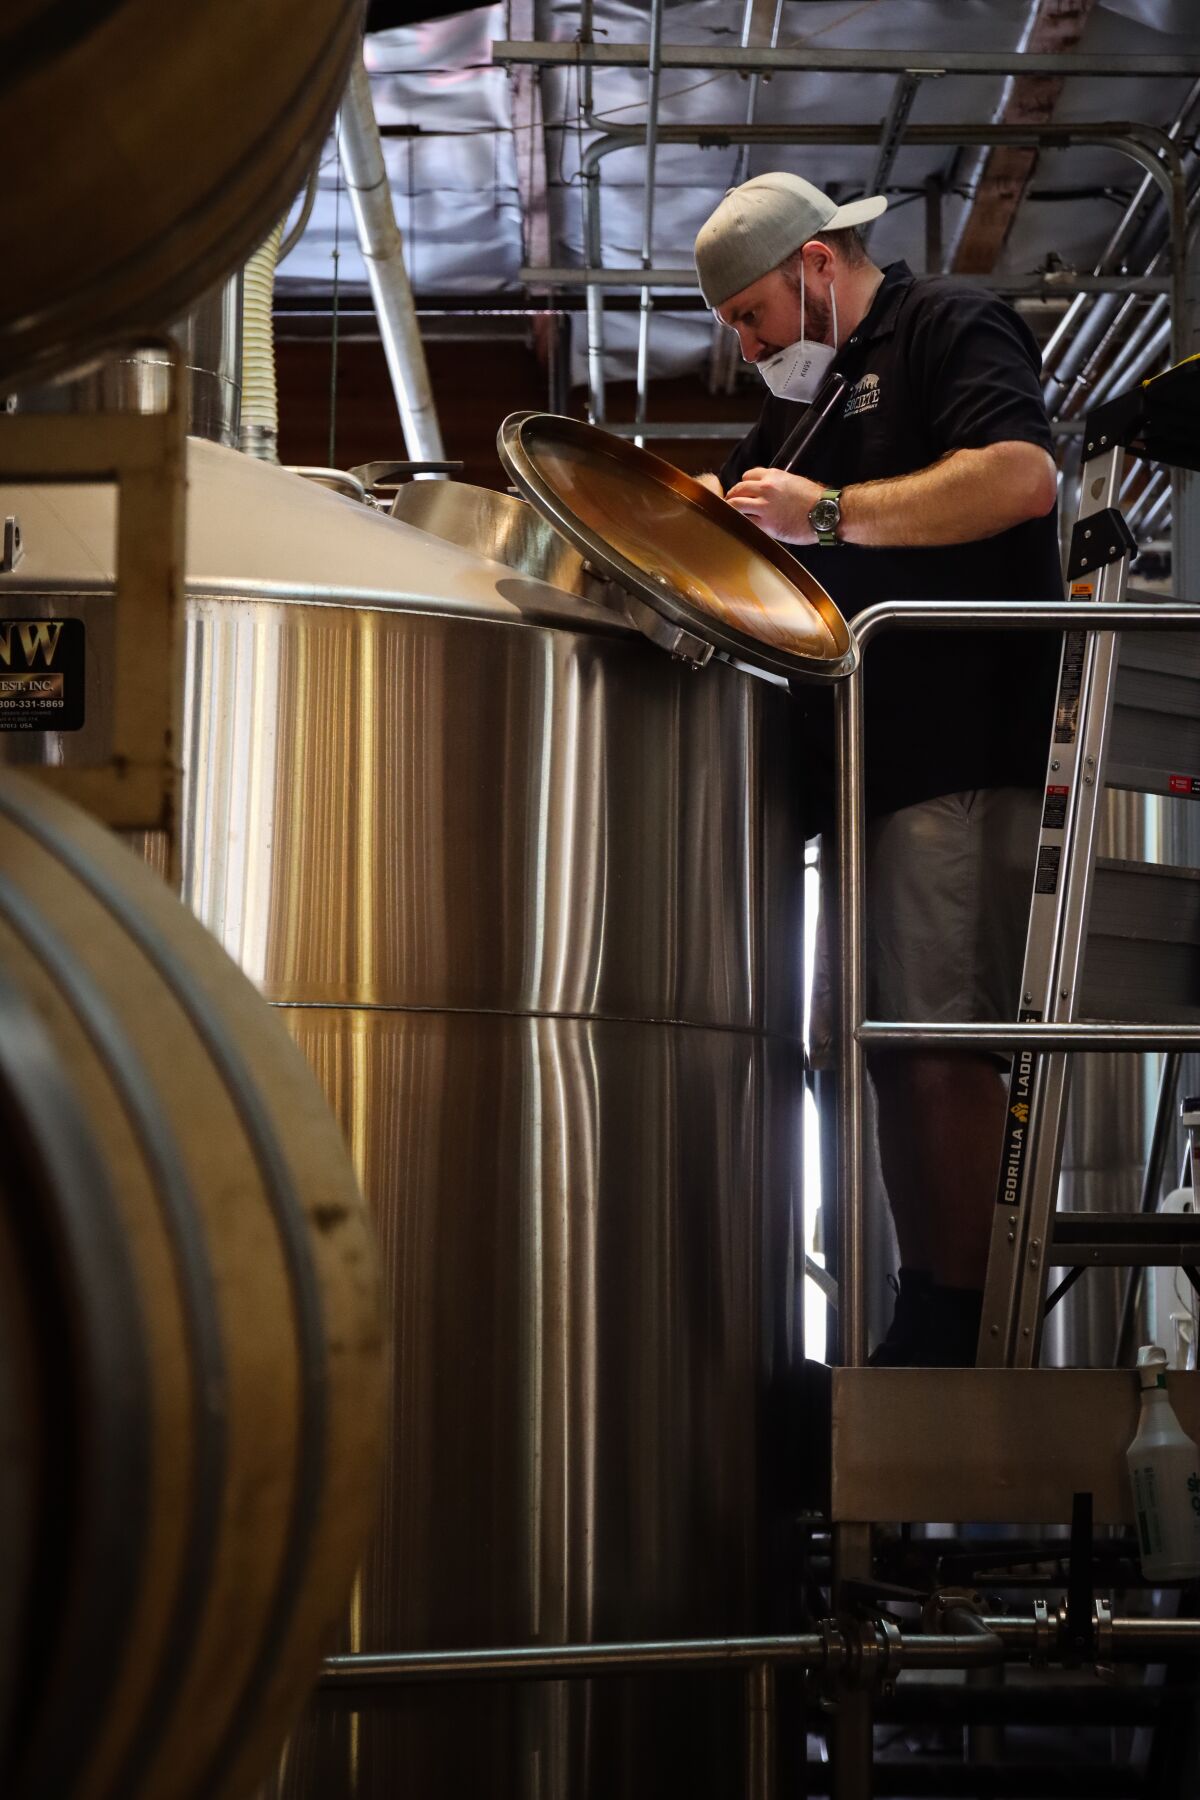 A behind-the-scenes look at brewing the 2021 Captial of Craft IPA.